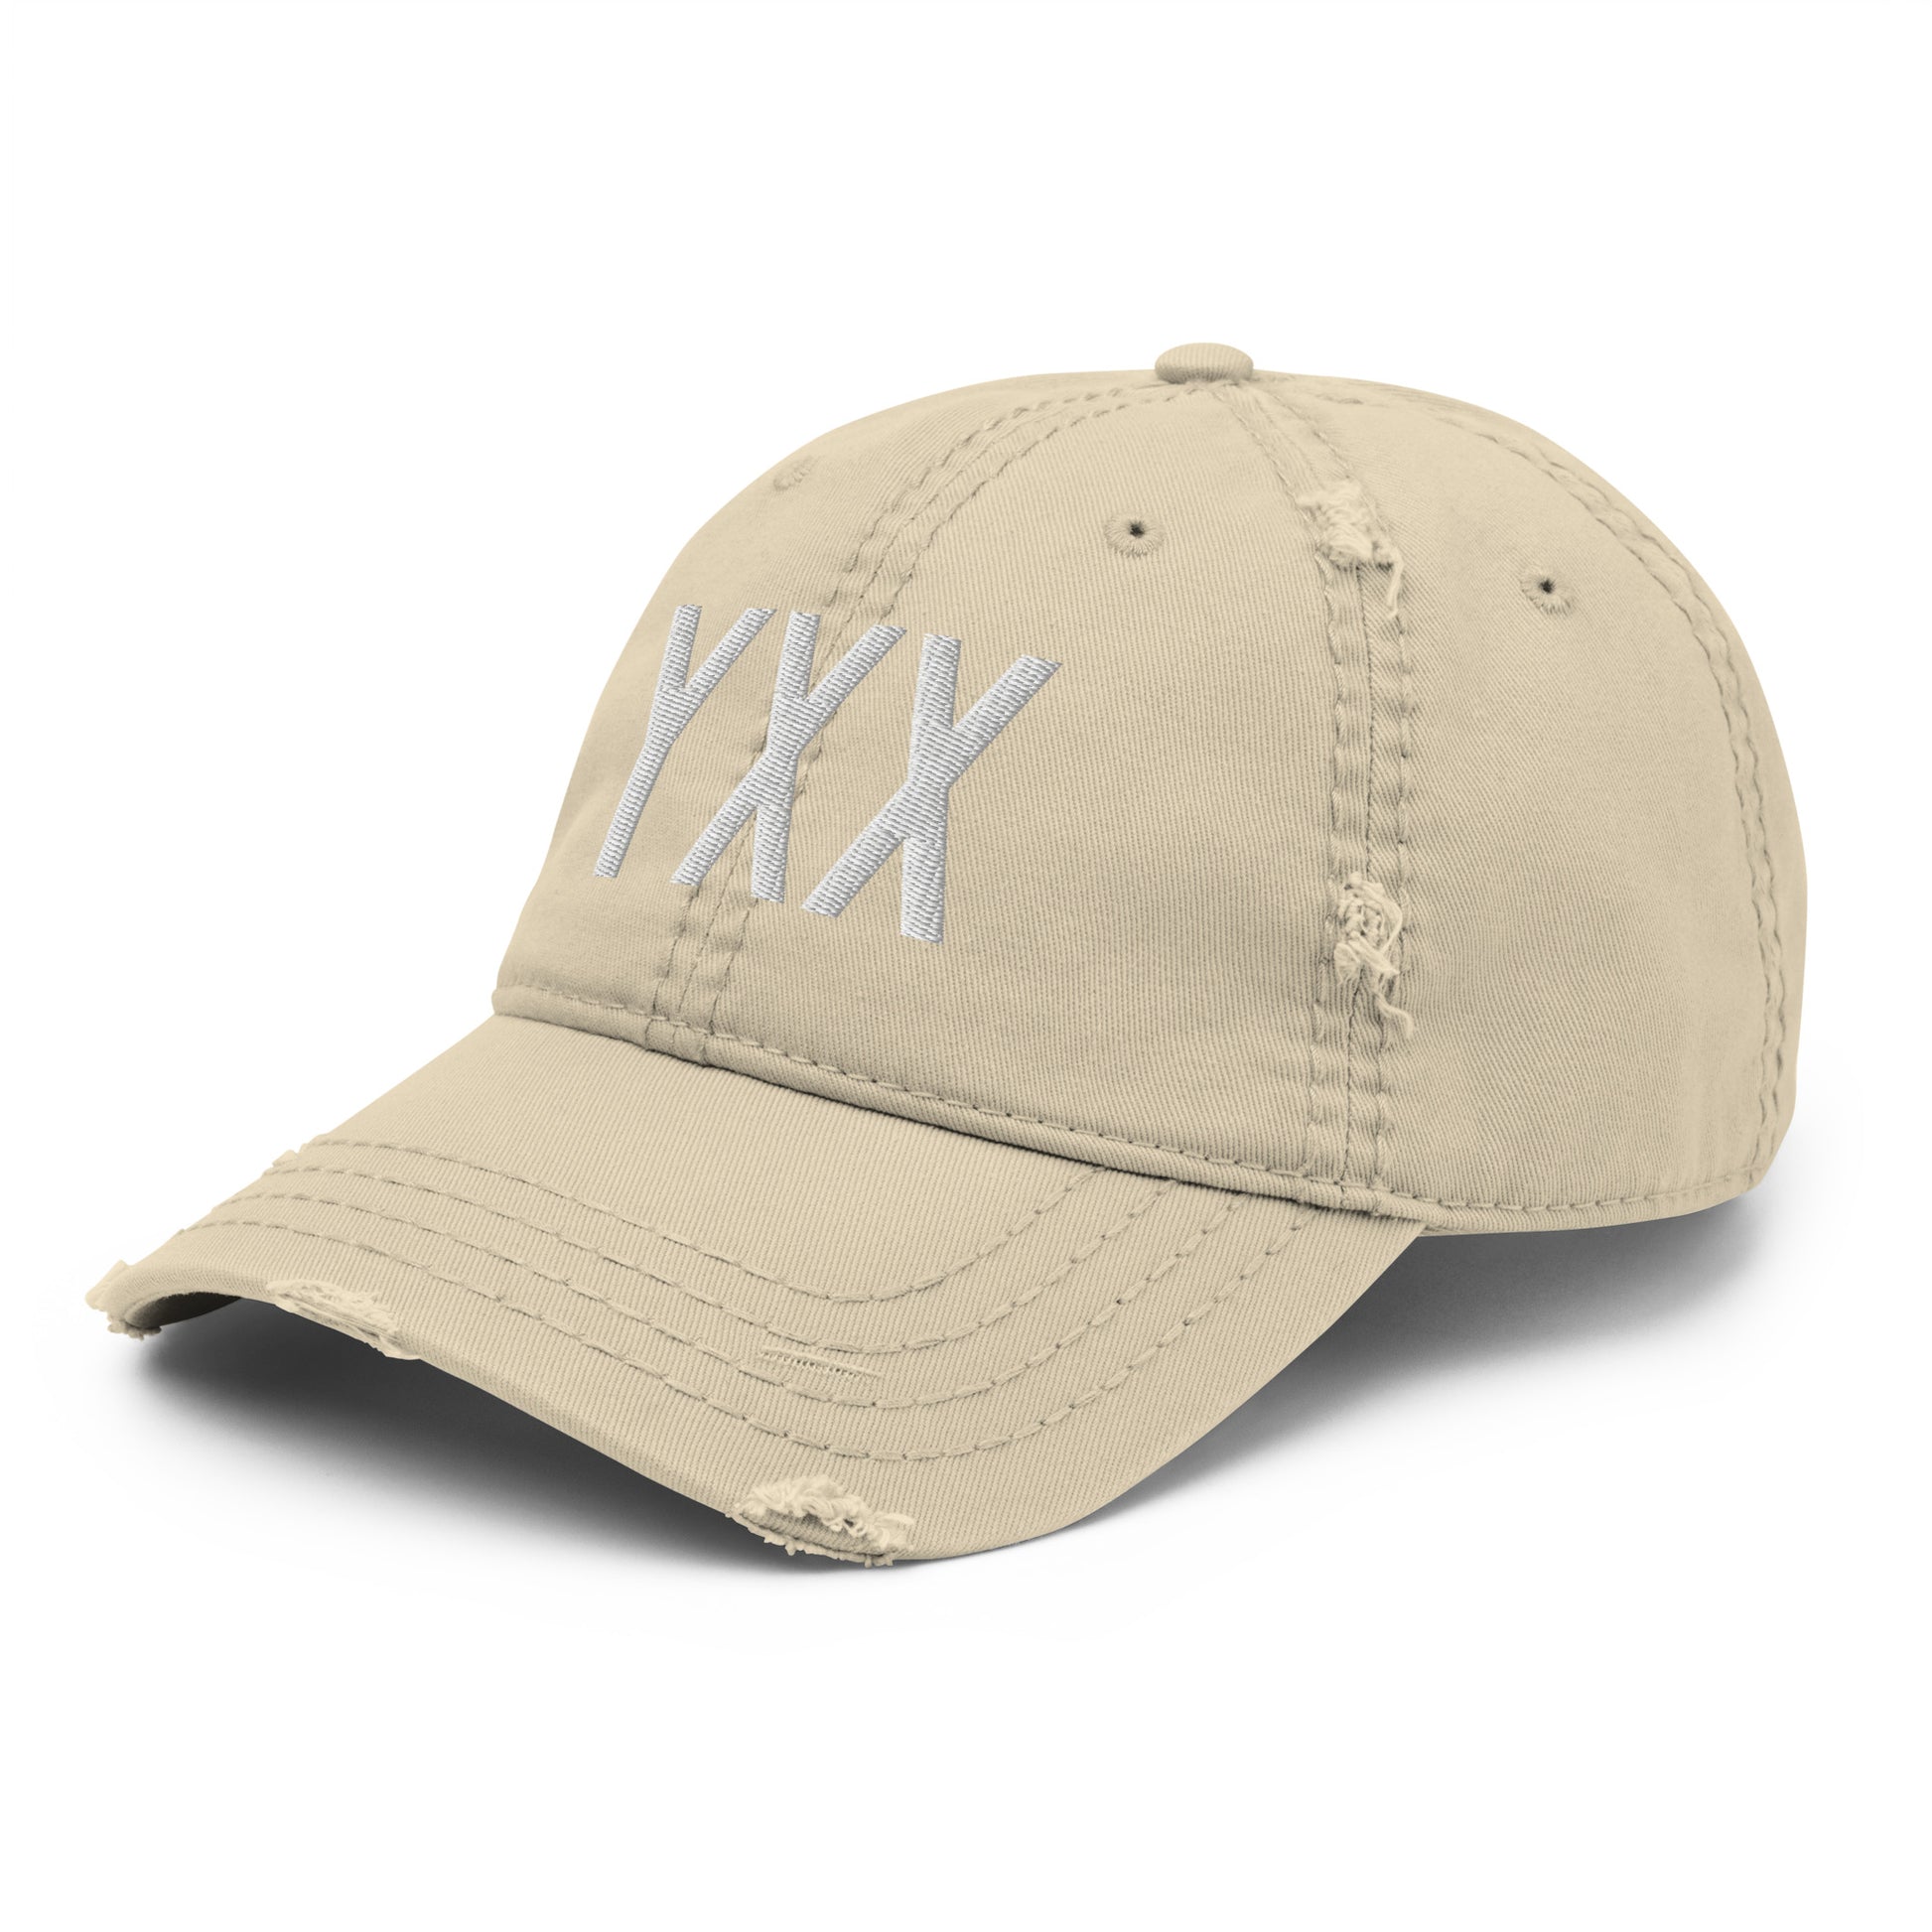 Airport Code Distressed Hat - White • YXX Abbotsford • YHM Designs - Image 19